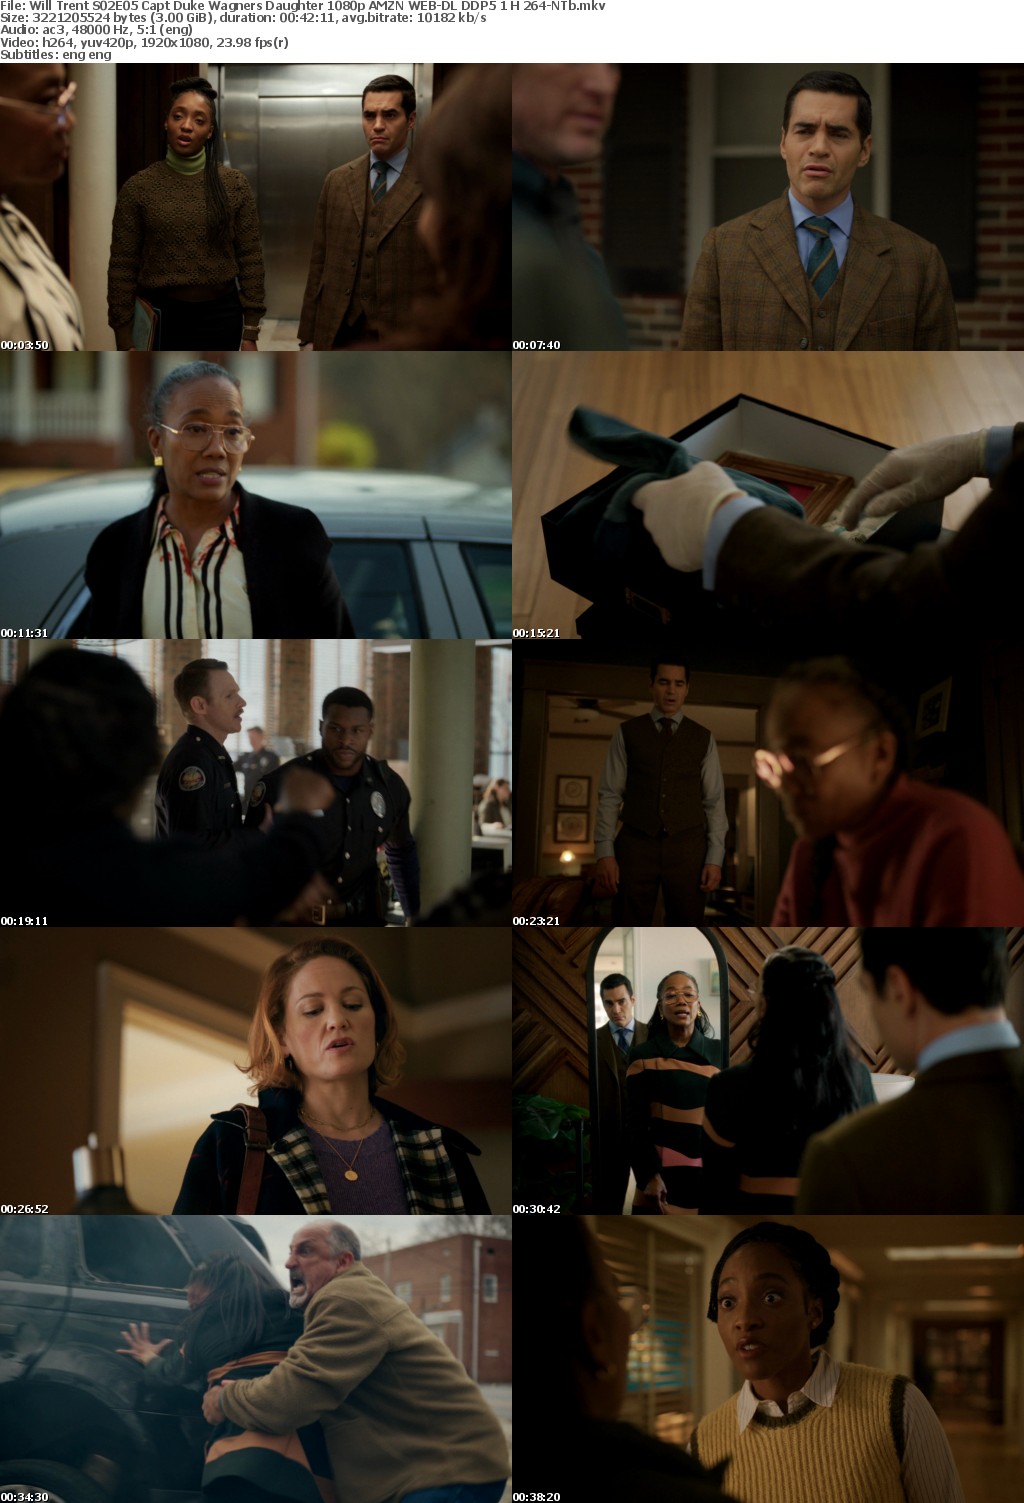 Will Trent S02E05 Capt Duke Wagners Daughter 1080p AMZN WEB-DL DDP5 1 H 264-NTb